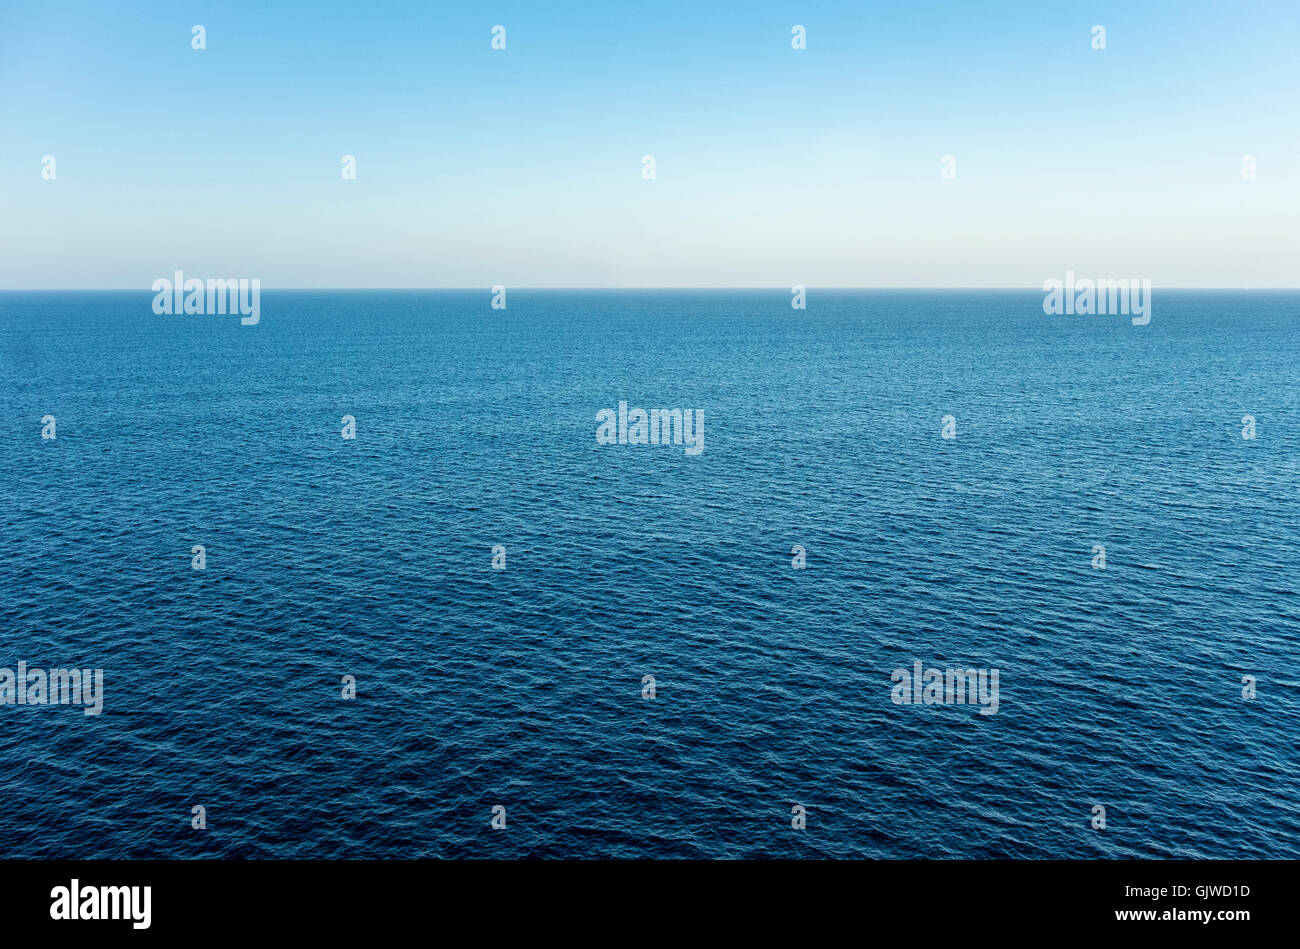 High view over an ocean horizon on a clear day Stock Photo